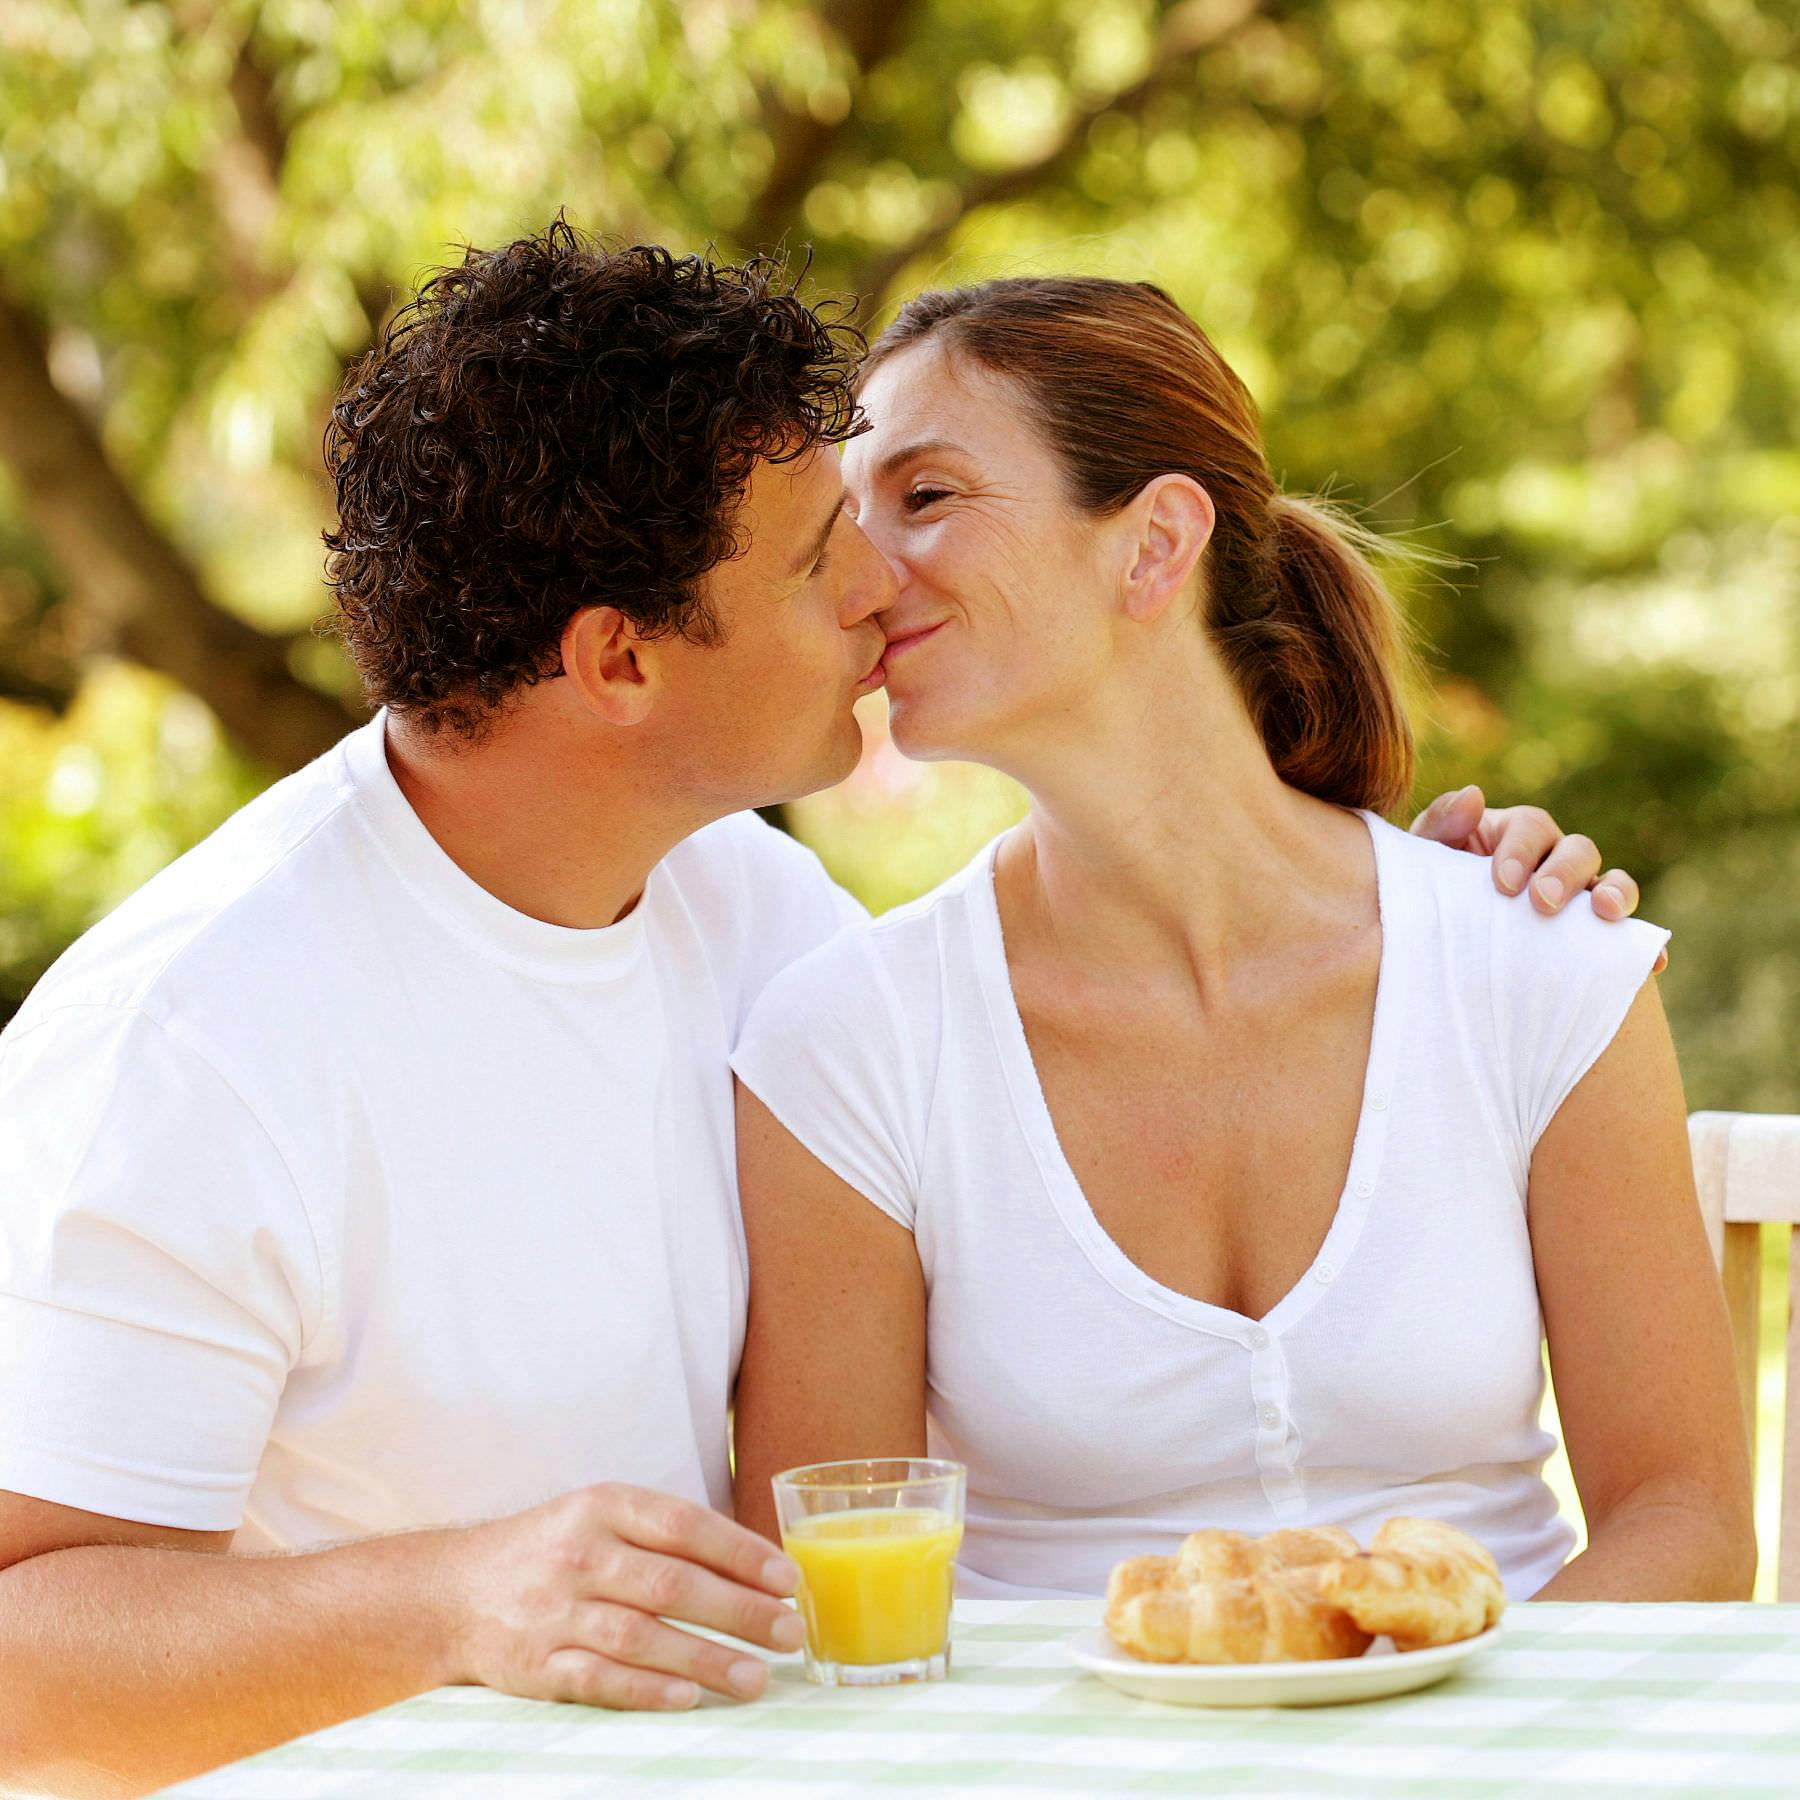 Stock unlimited photo https://www.stockunlimited.com/image/couple-sitting-at-the-picnic-table-kissing_1699854.html
